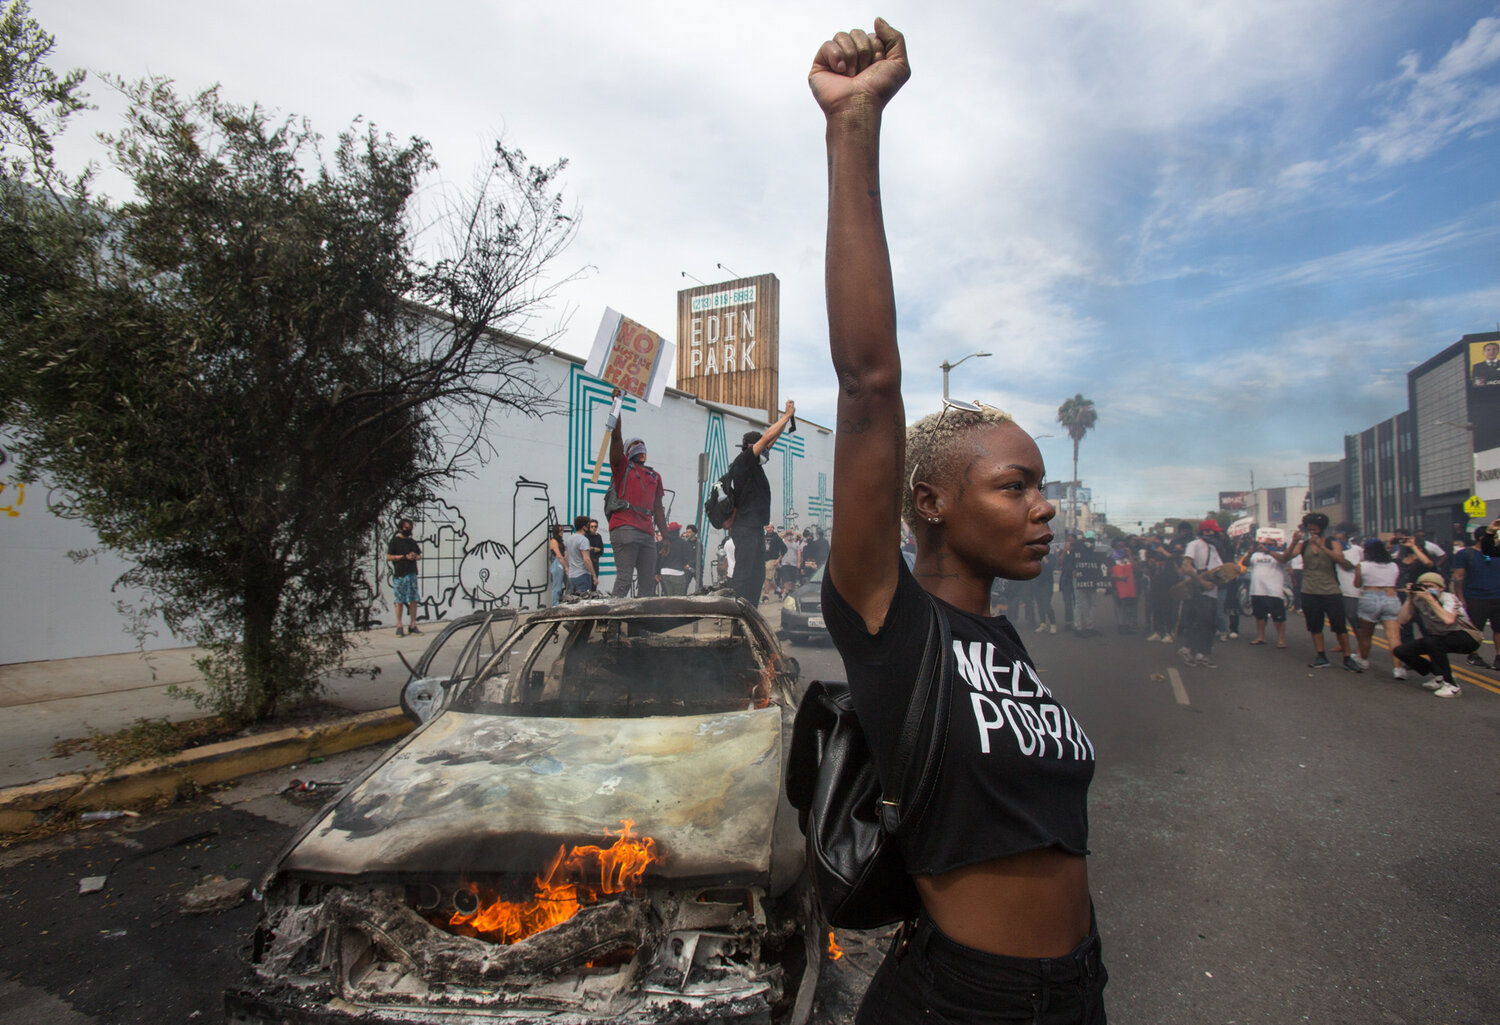  A protester poses for photos next to a burning police vehicle in Los Angeles on May 30, 2020, during a demonstration over the death of George Floyd, a Black man who died in Minneapolis after a white police officer pressed a knee into his neck for several minutes. (AP Photo/Ringo H.W. Chiu) 